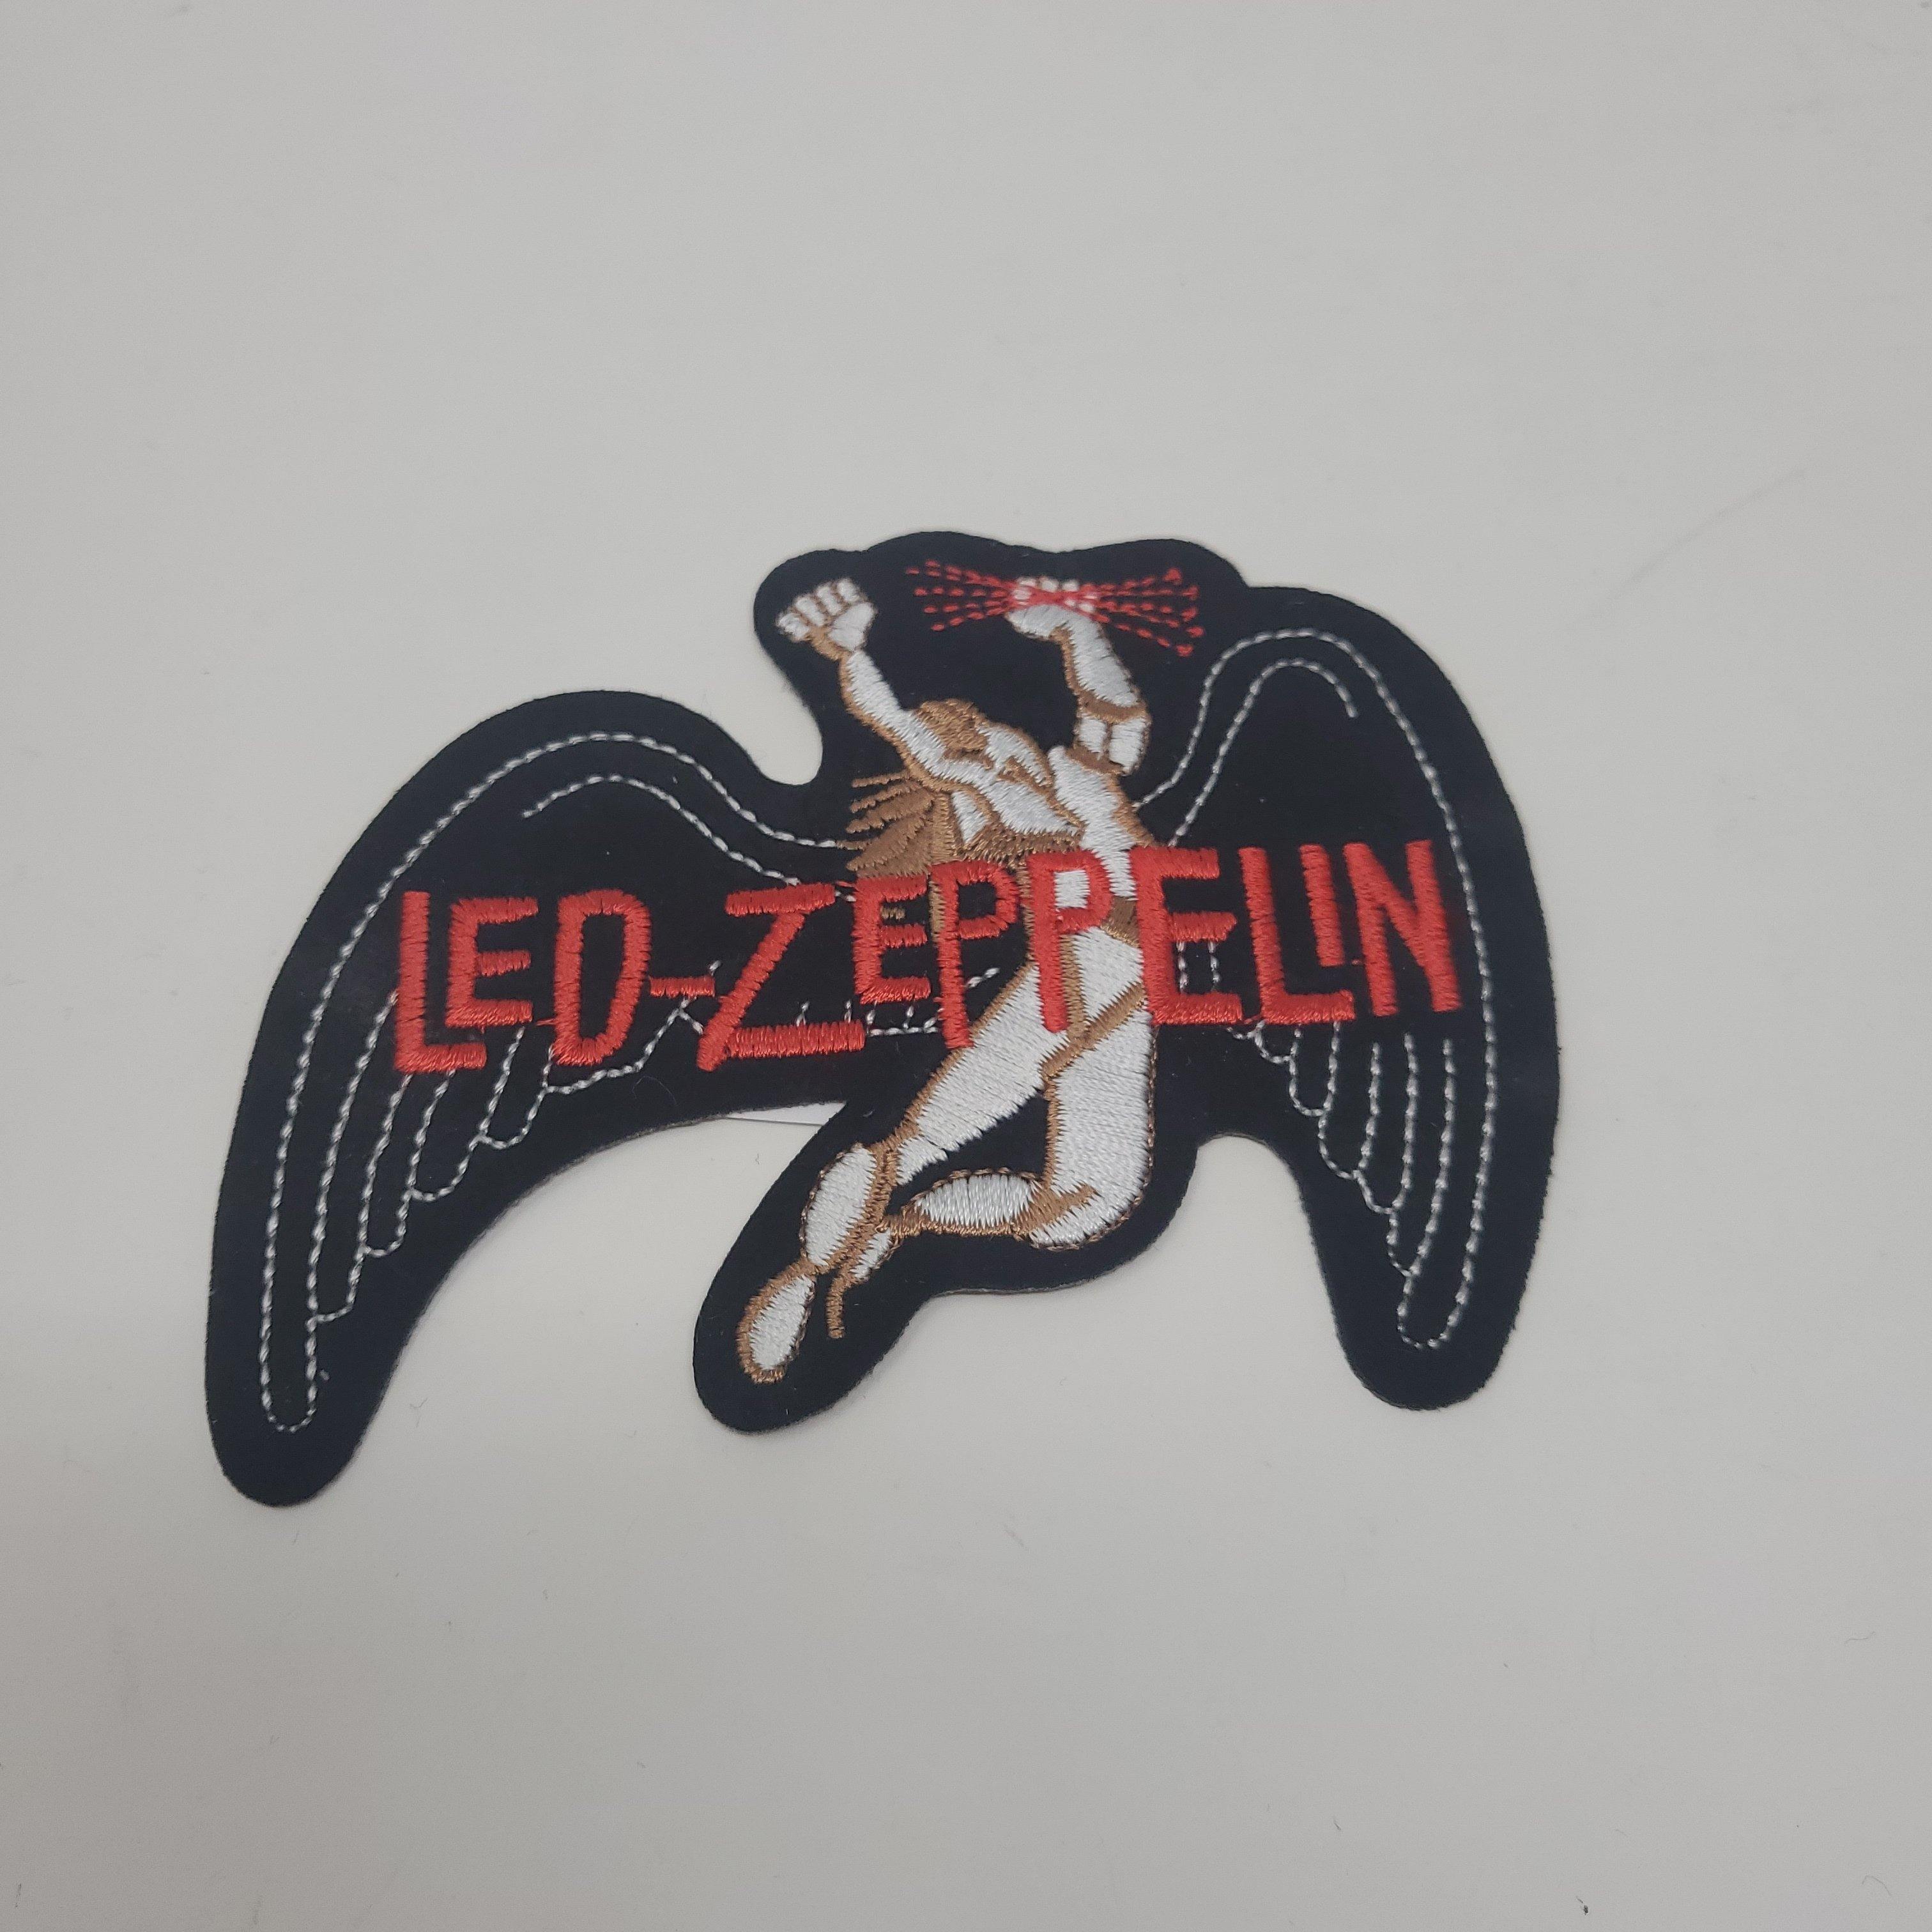 Patch Led Zeppelin Icarus Red-hotRAGS.com